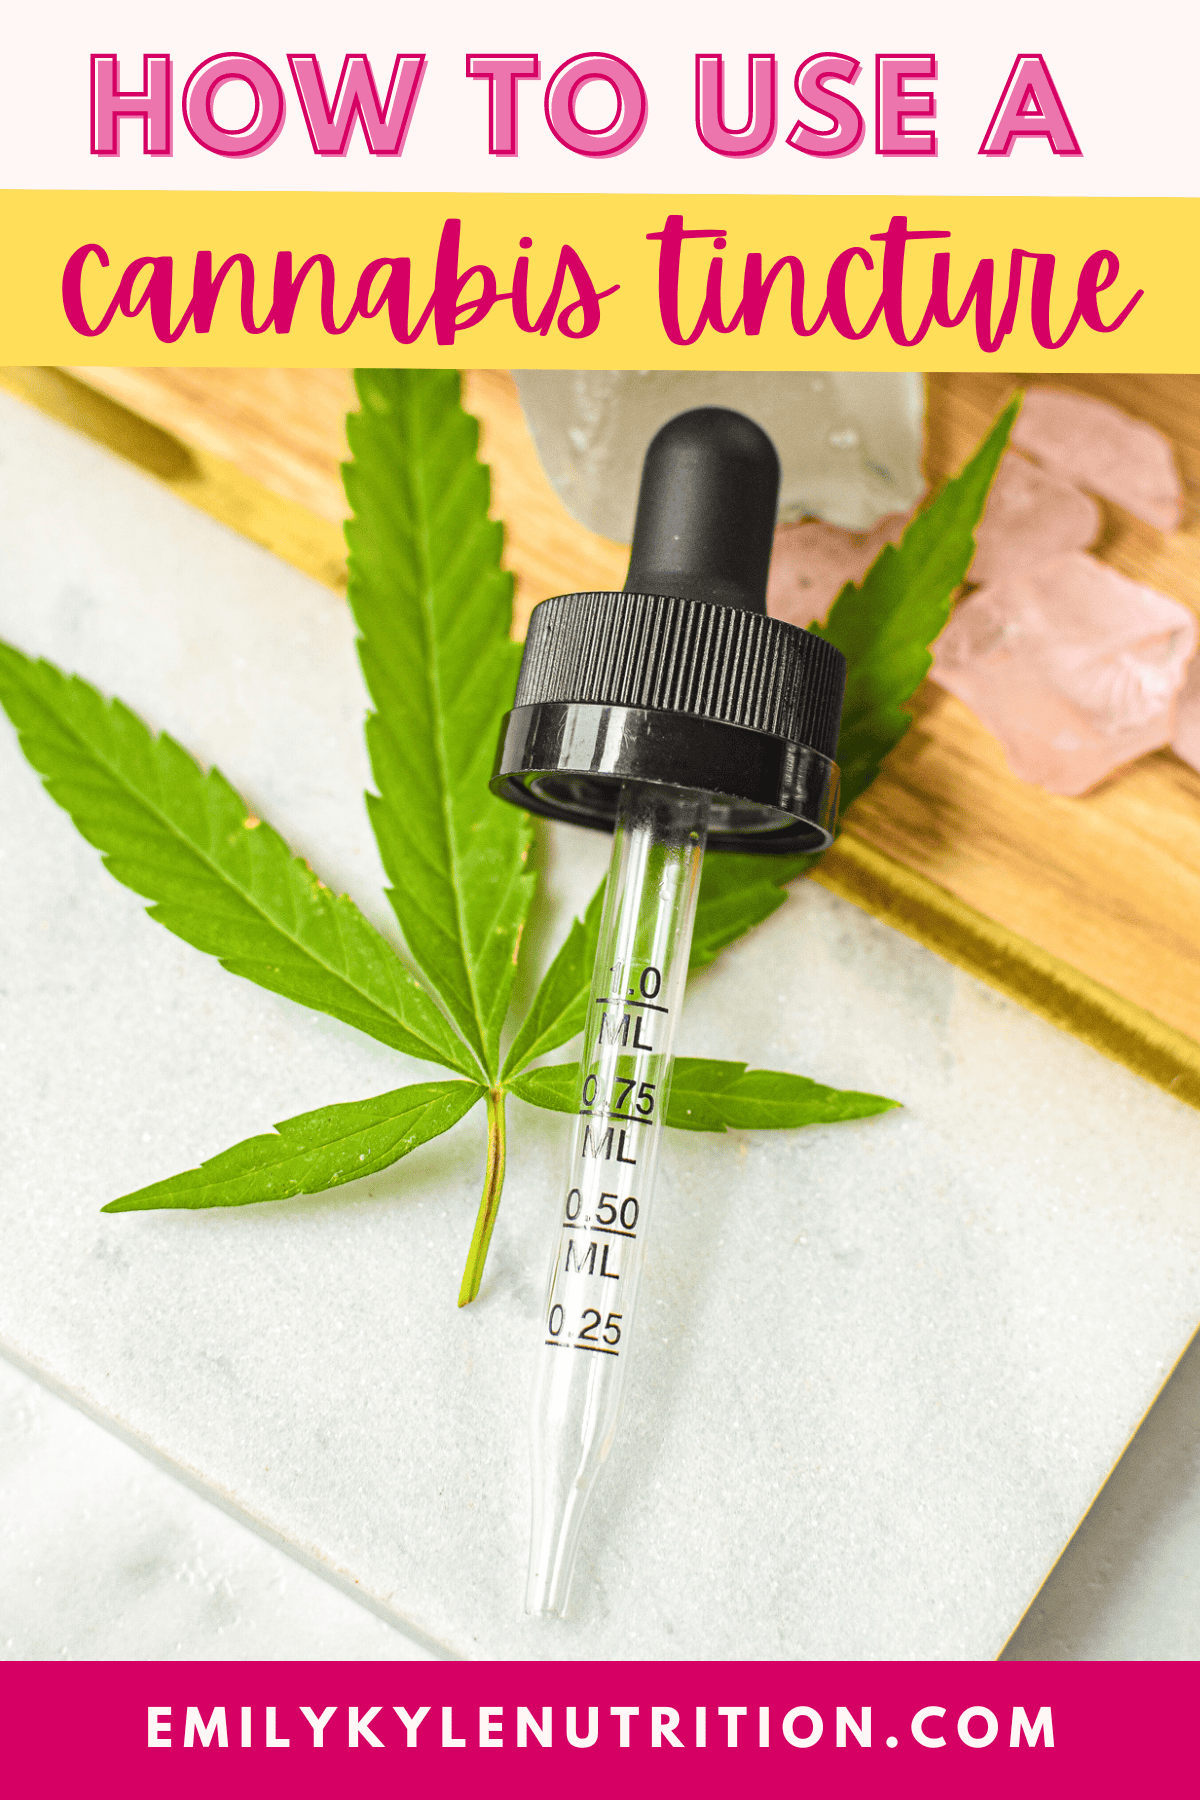 A picture of a tincture dropper with text that says how to use a cannabis tincture.